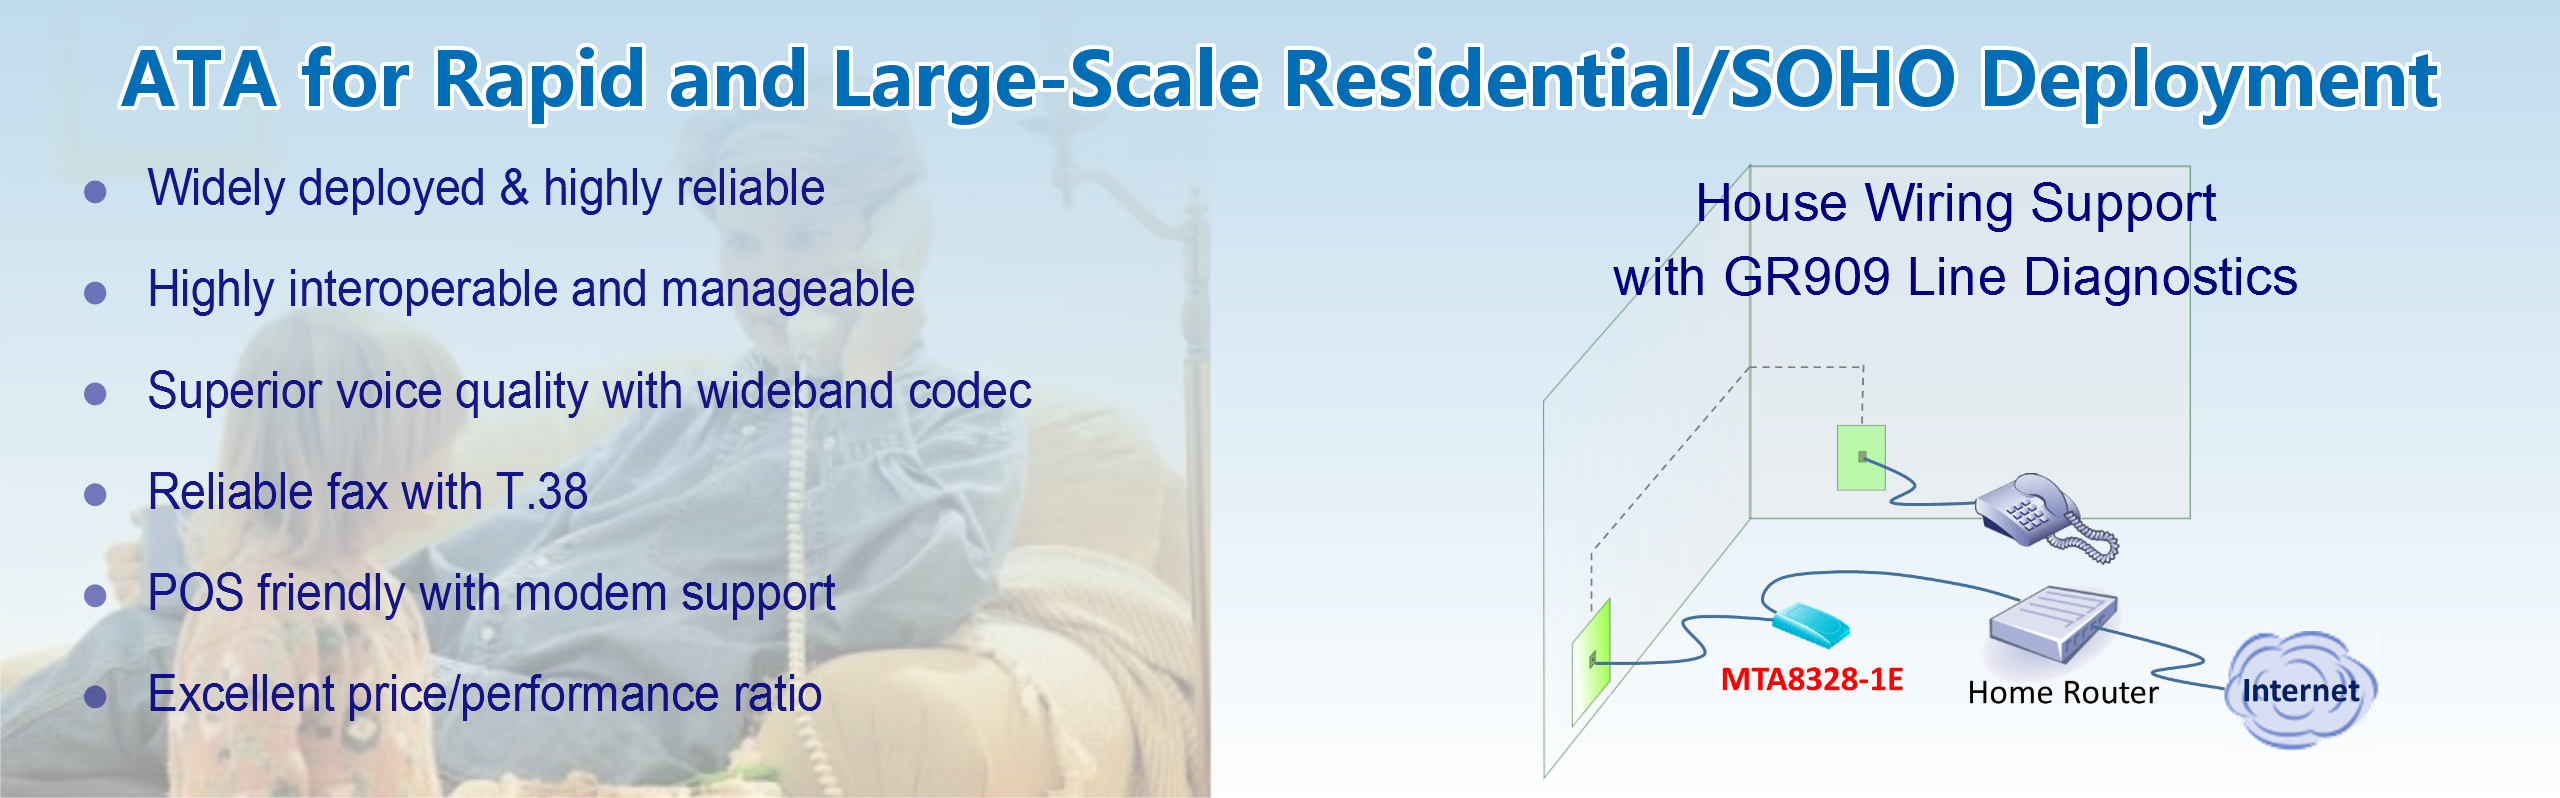 ATA for Rapid and Large-Scale Residential/SOHO Deployment